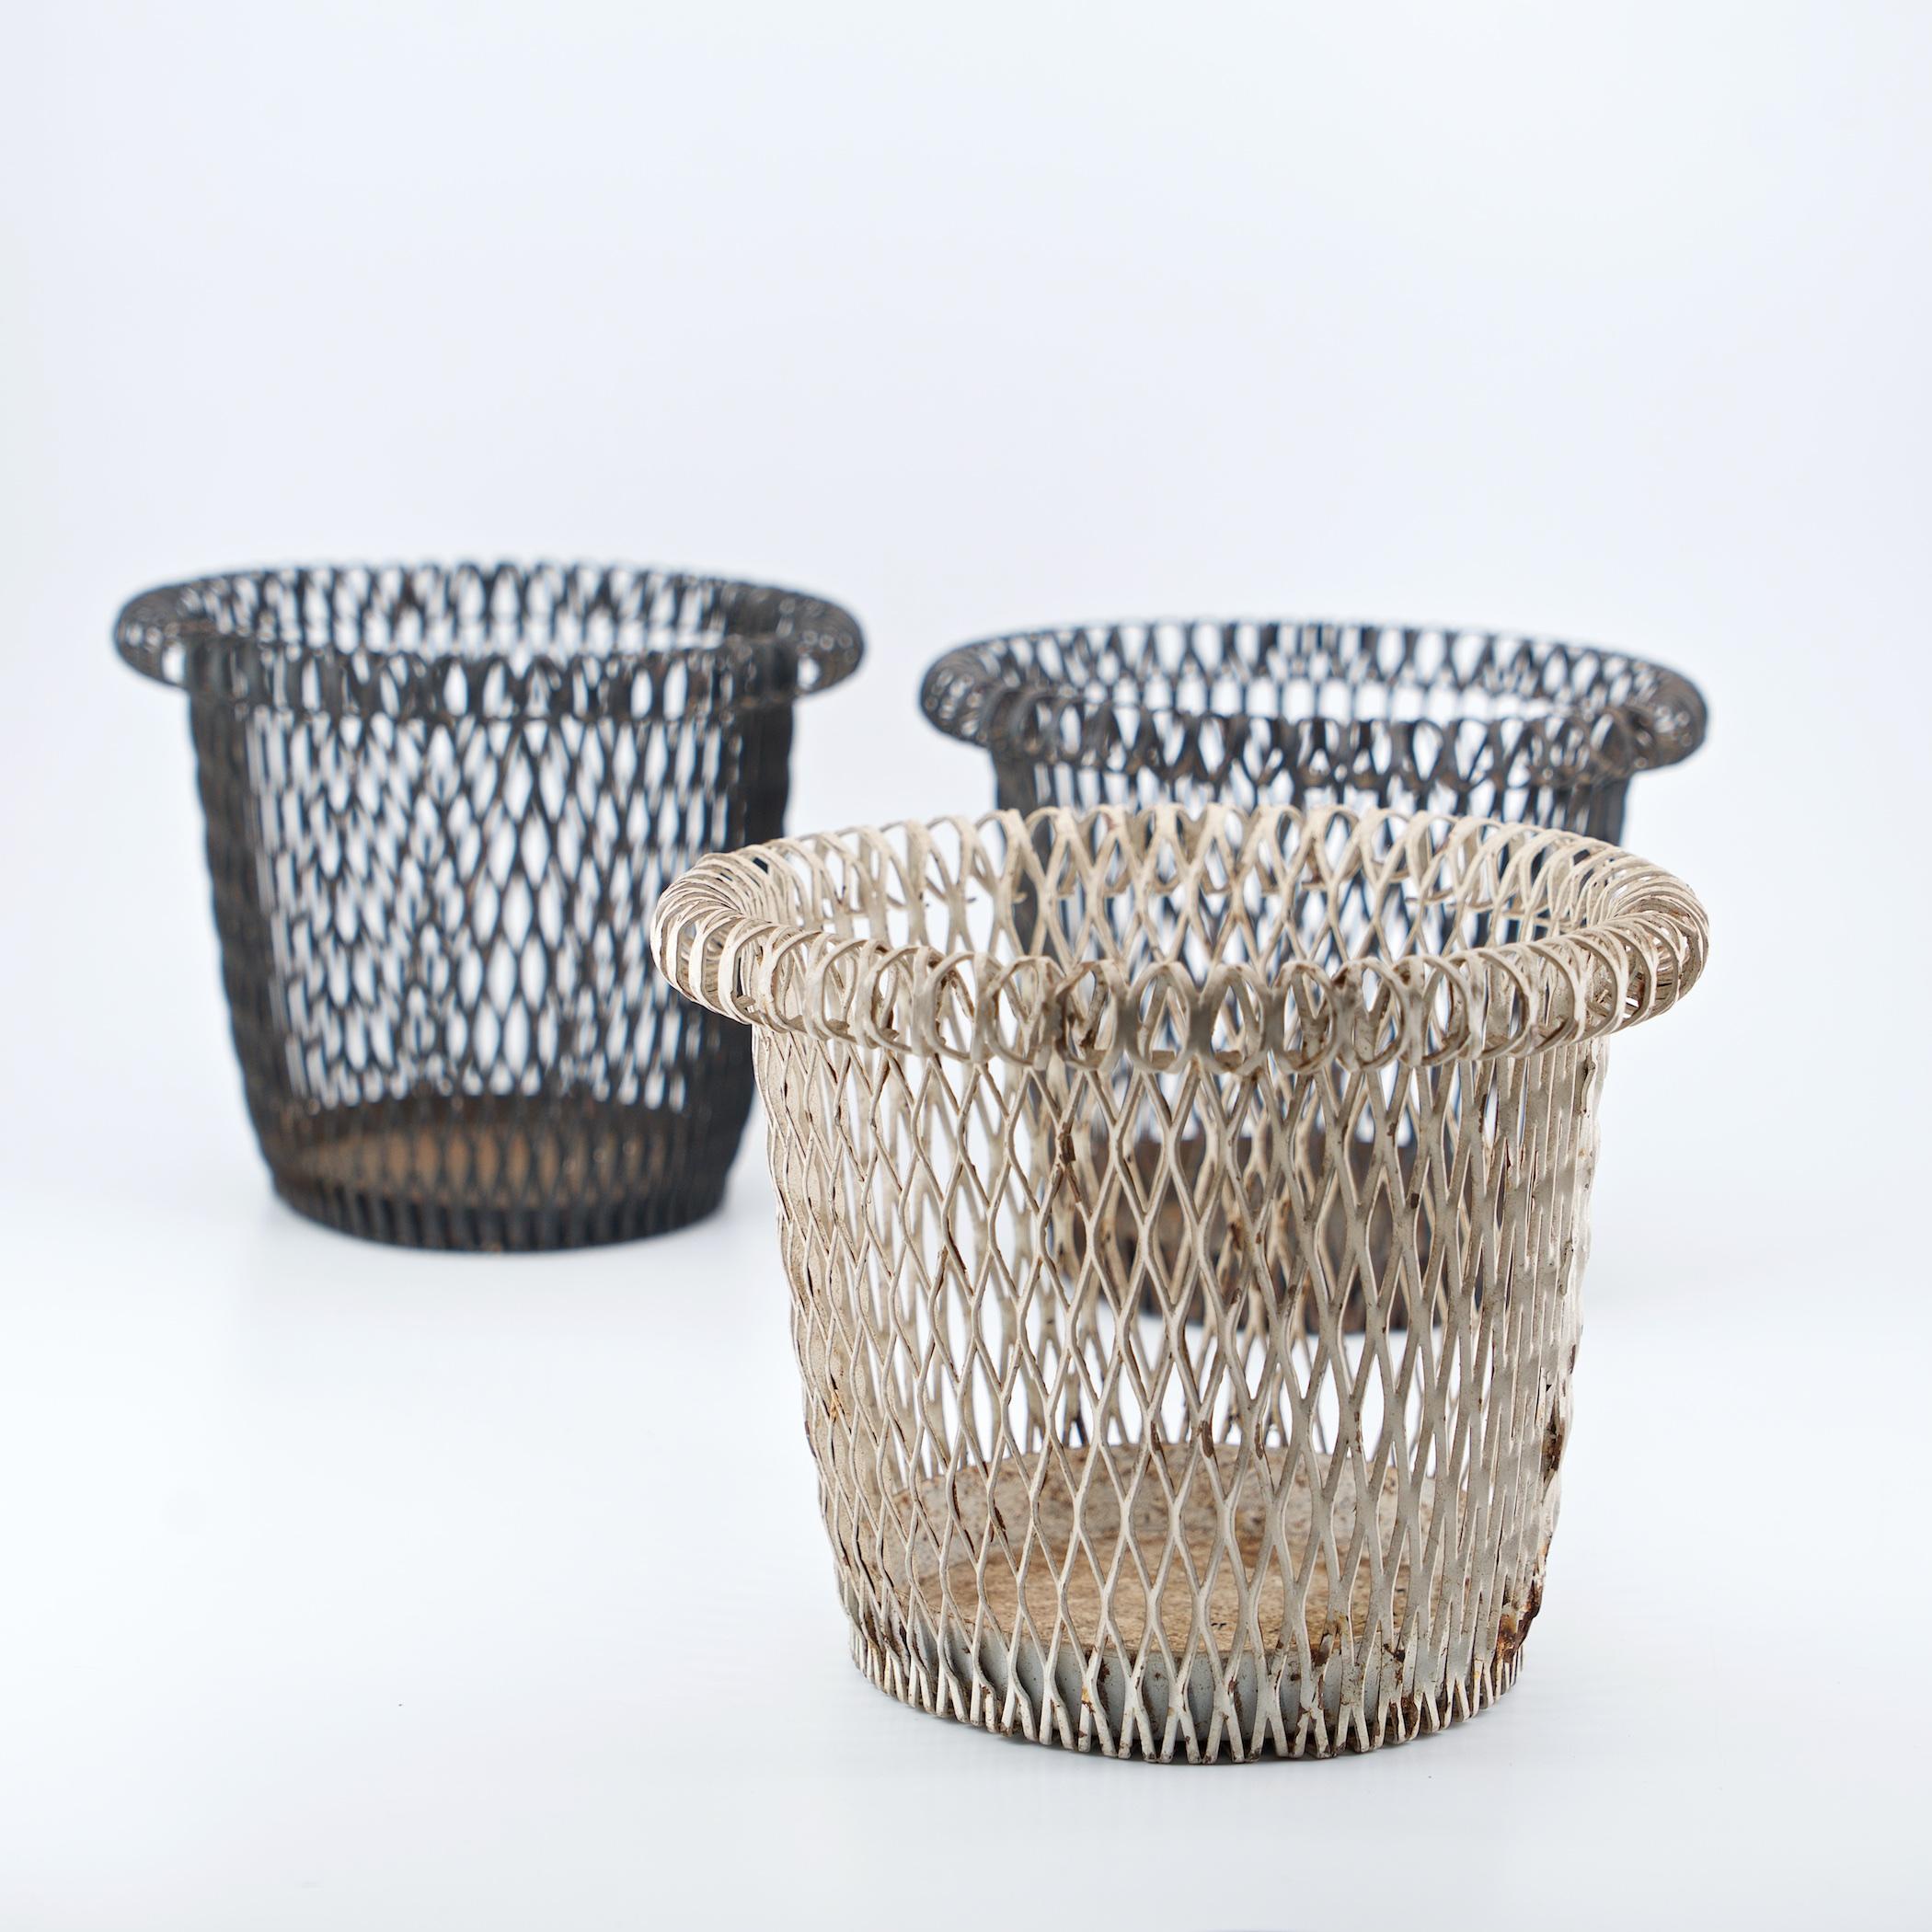 Hard to find, wonderful American made french inspired planter baskets, set of three included.